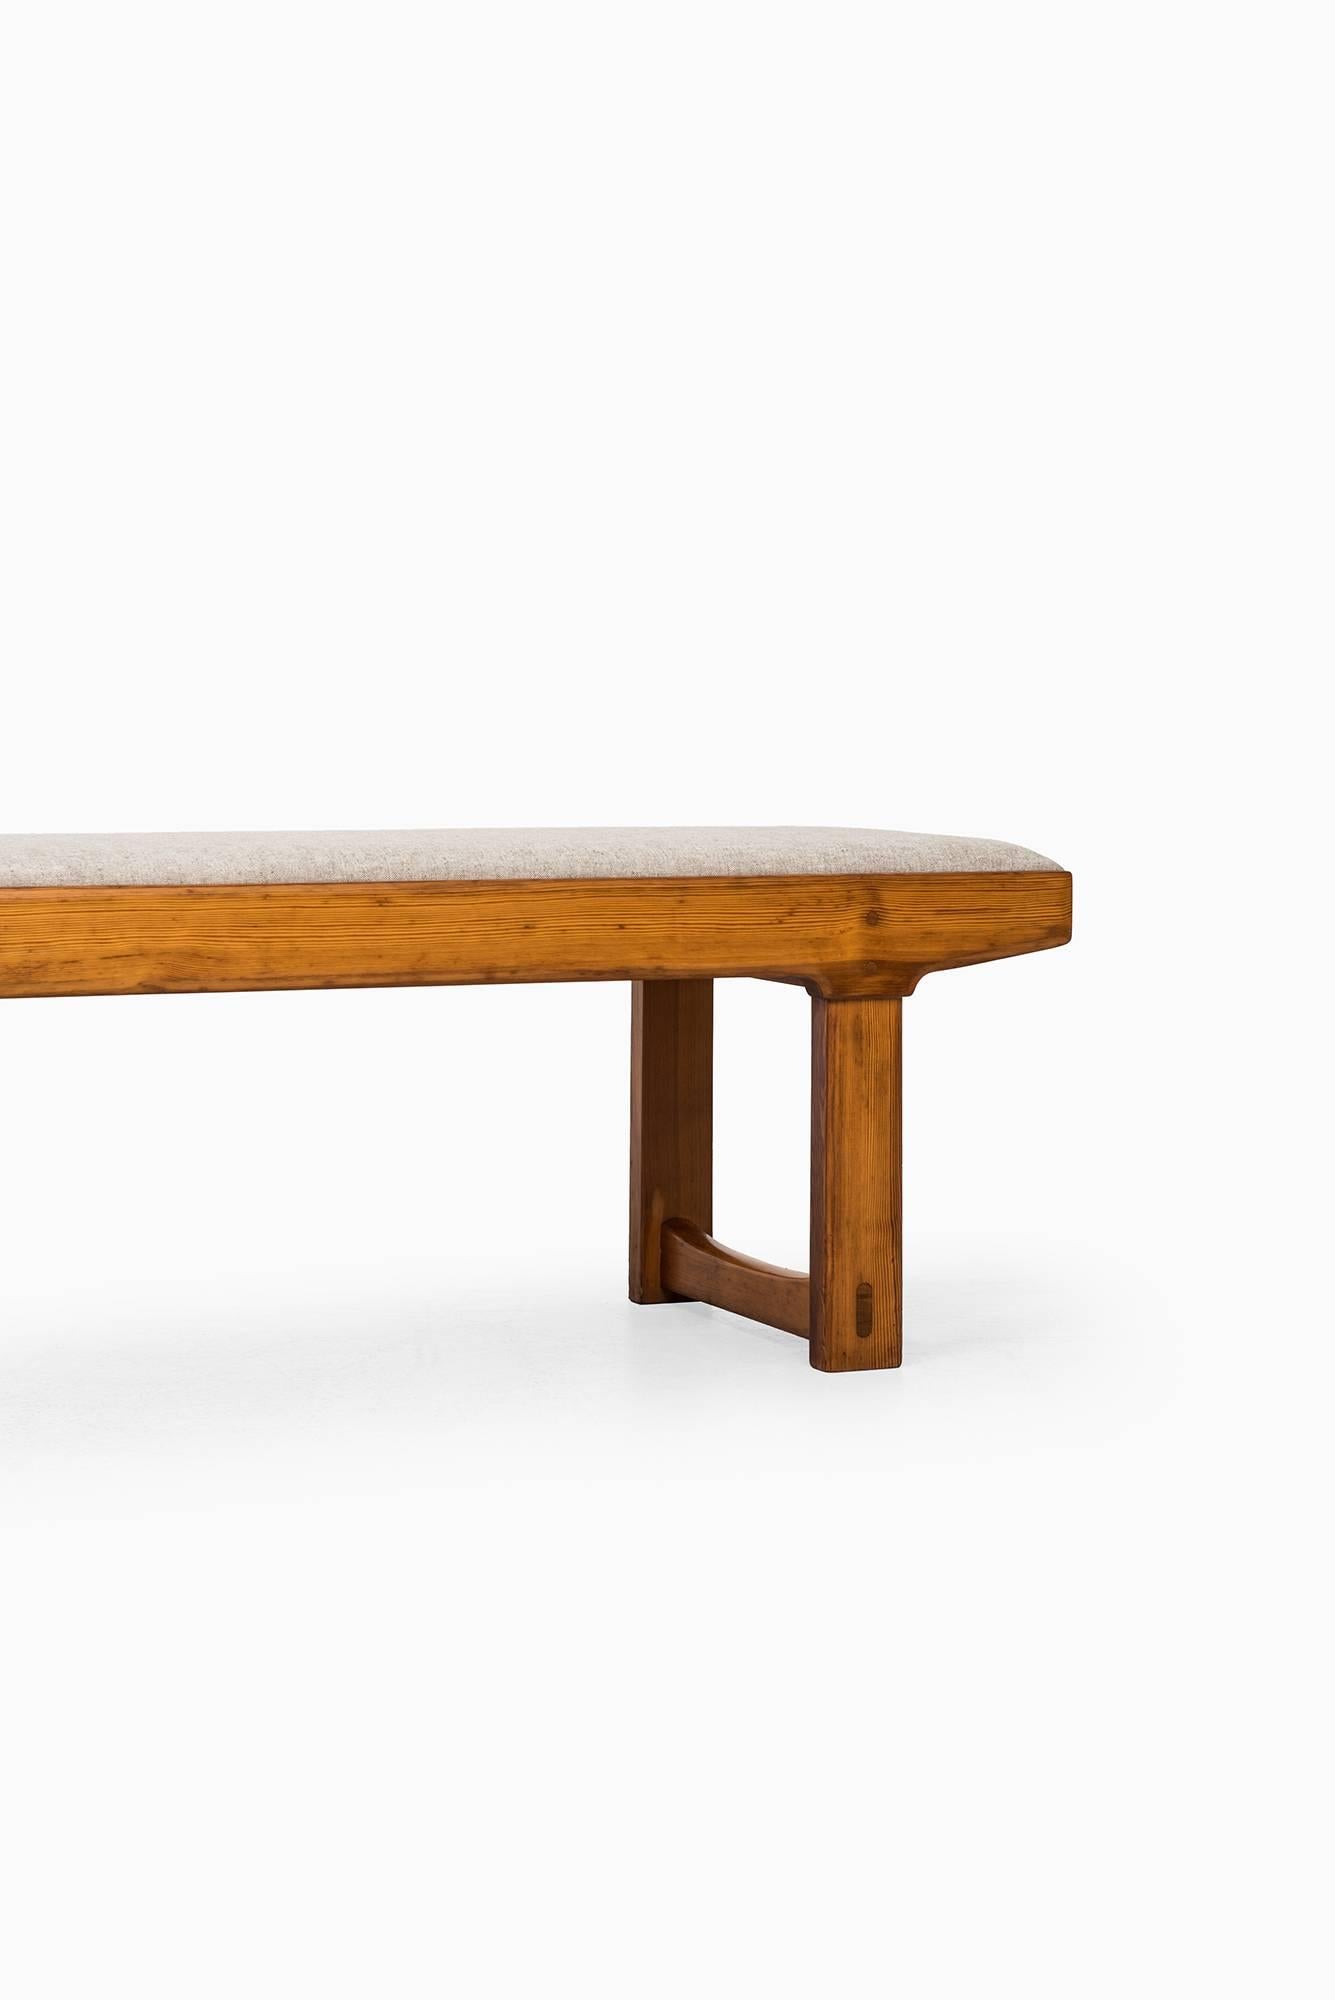 Rare bench in the manner of Carl Malmsten. Produced in Sweden.